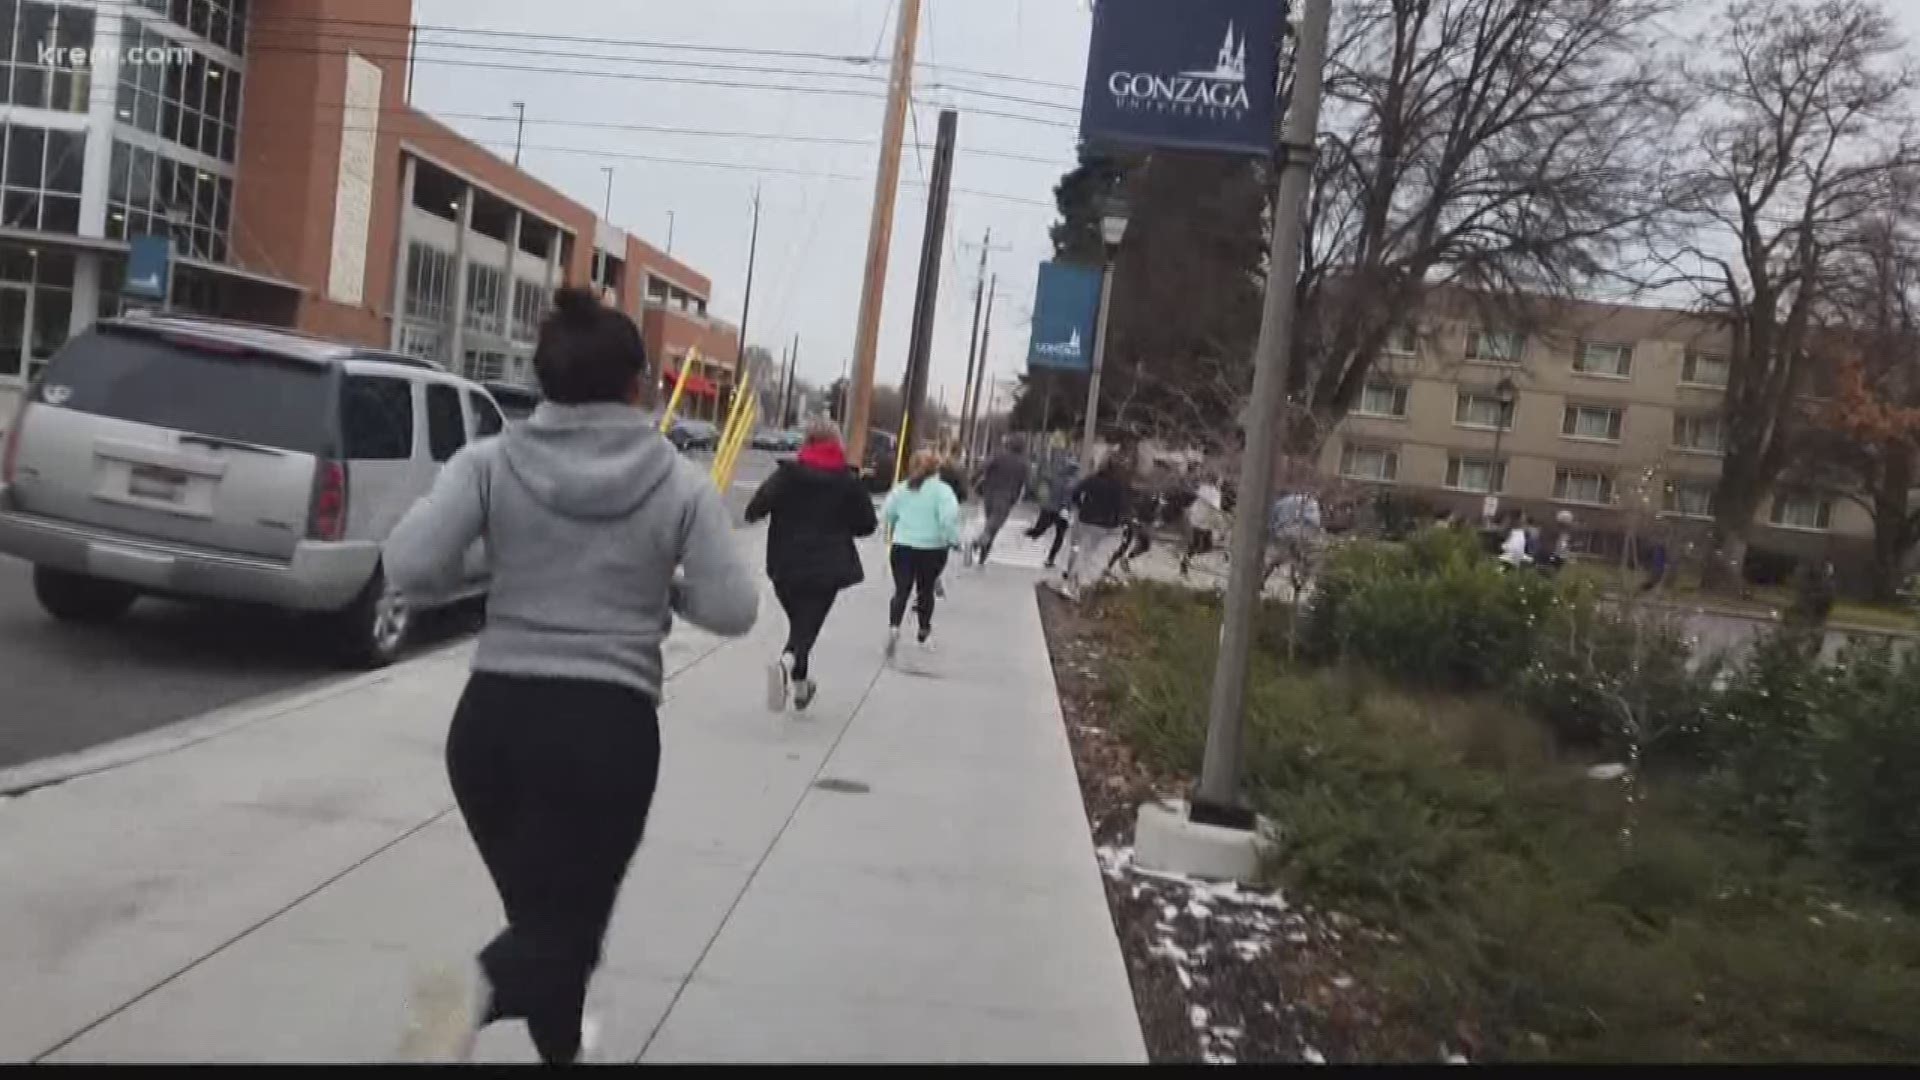 Gonzaga students race to get tickets to see their team take on the University of North Carolina.